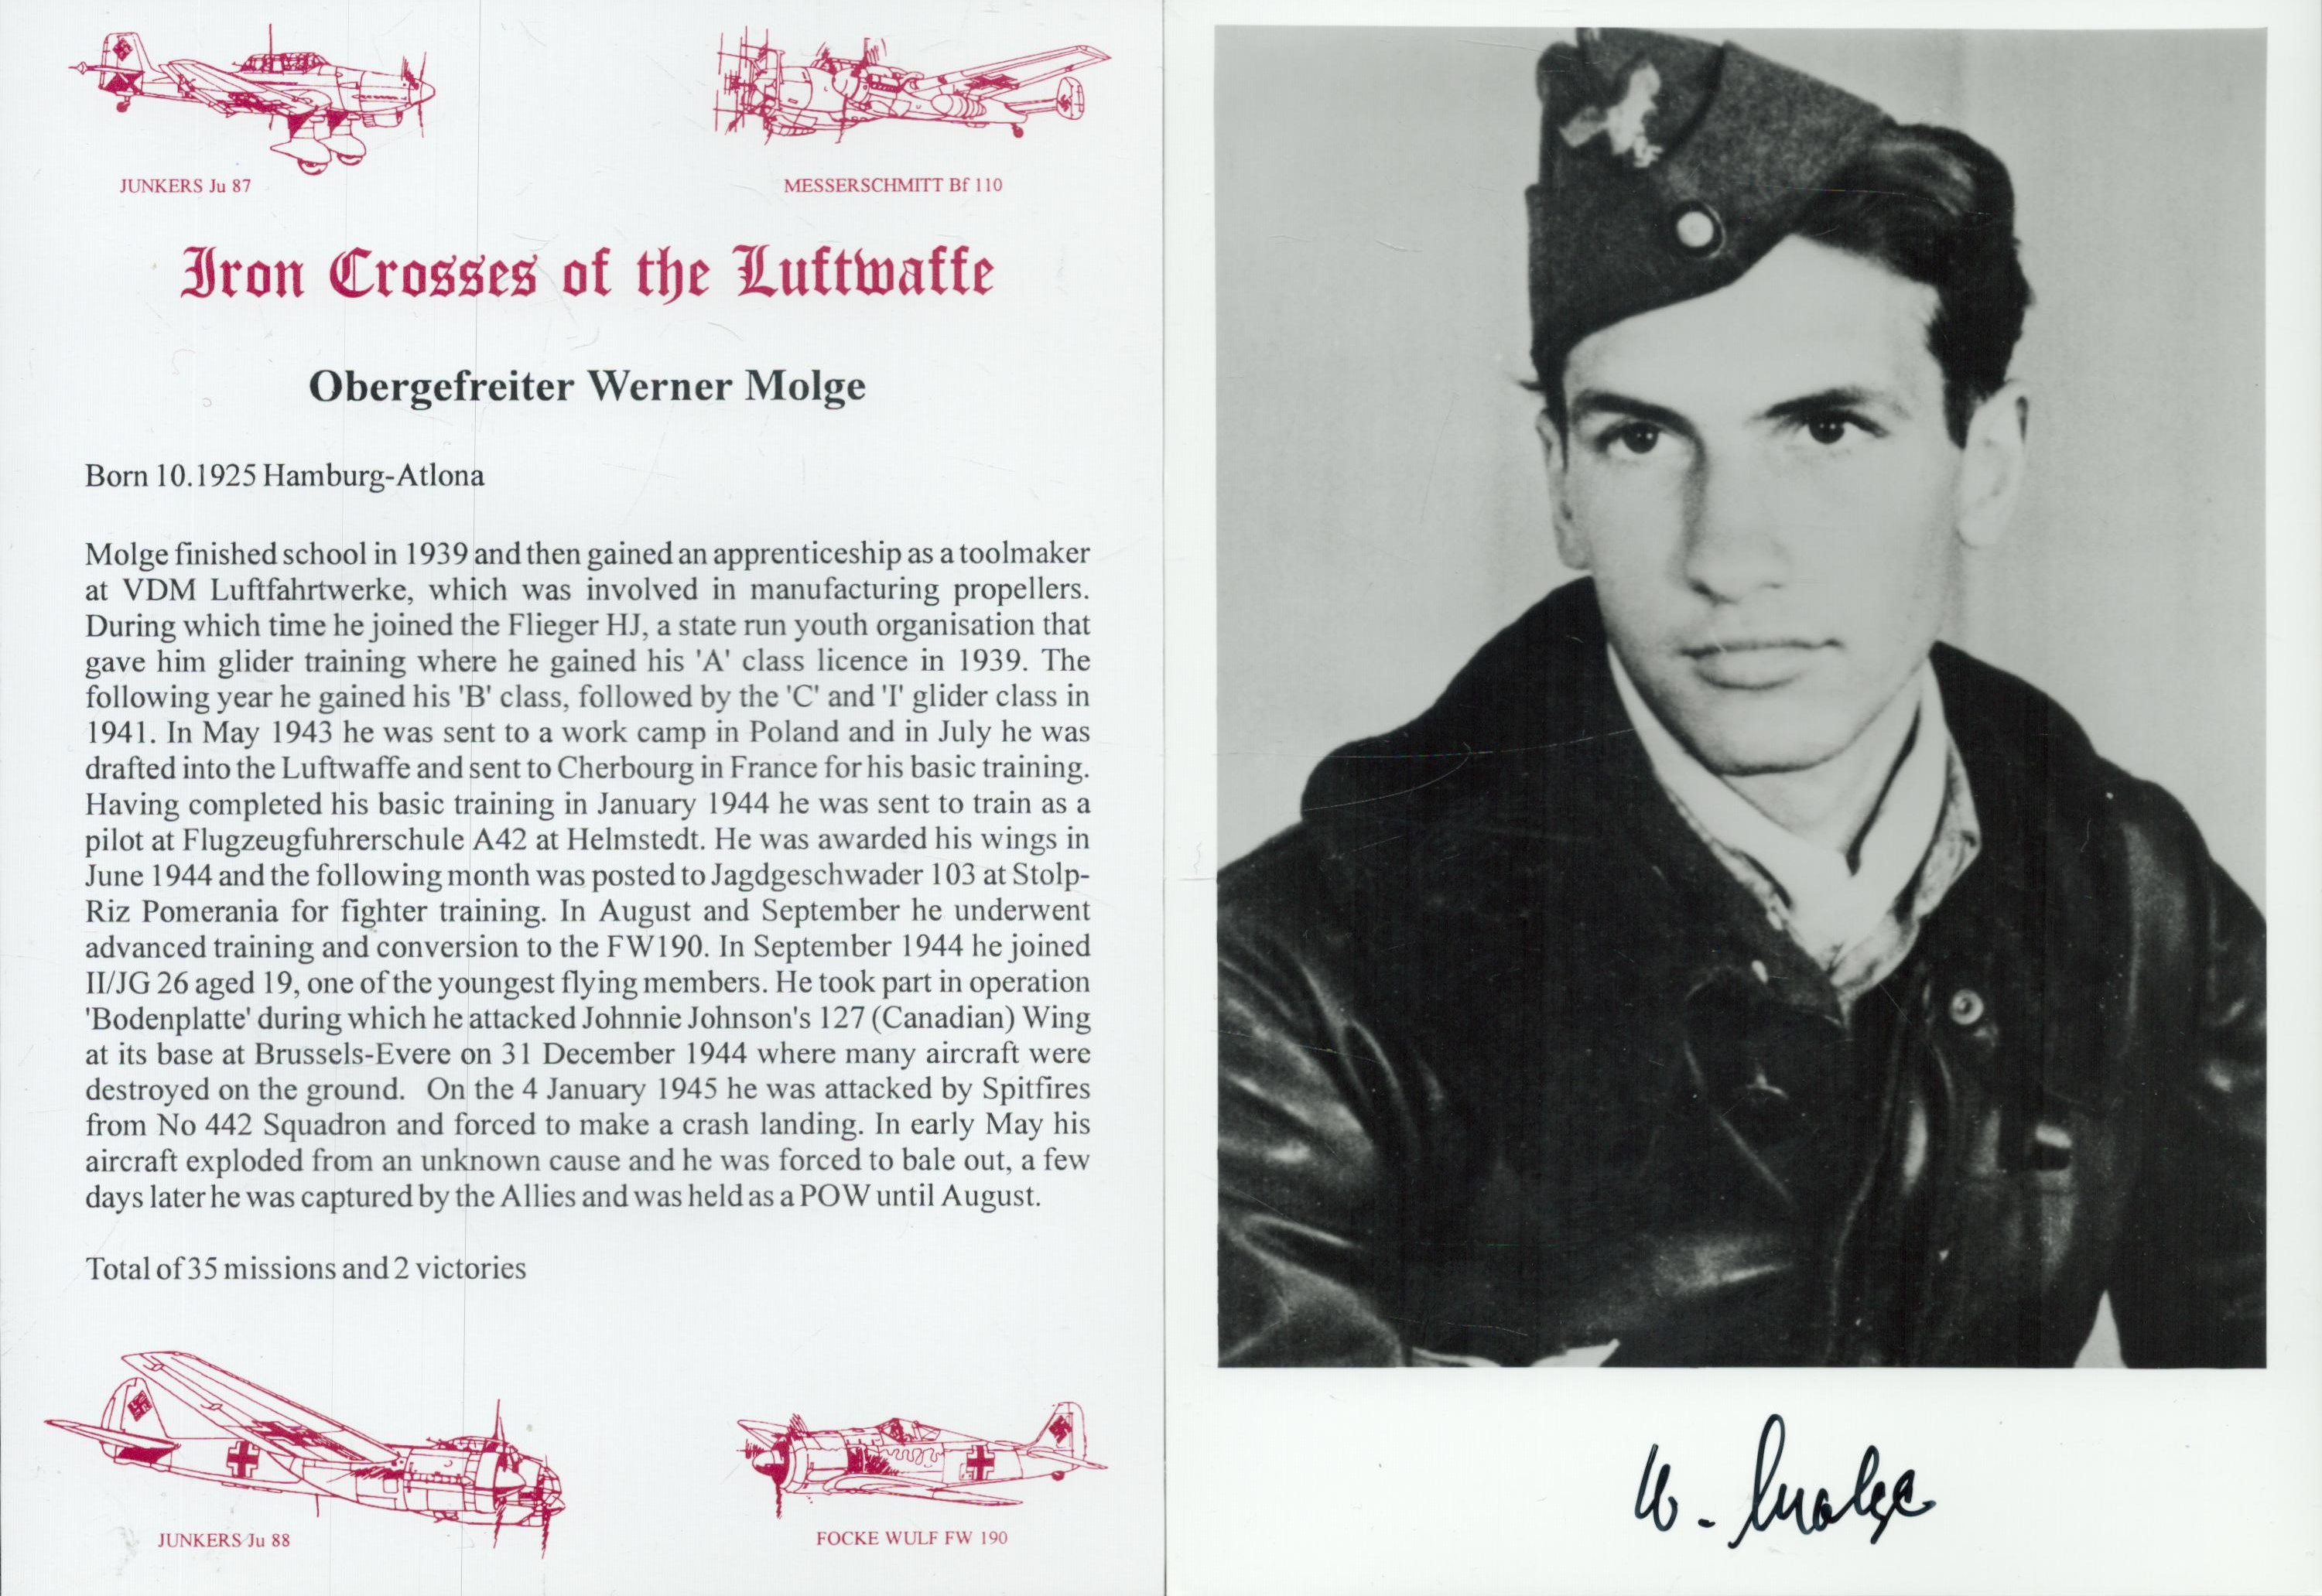 WW2 Luftwaffe fighter ace Werner Molge KC signed 7 x 5 inch b/w portrait photo along with a super